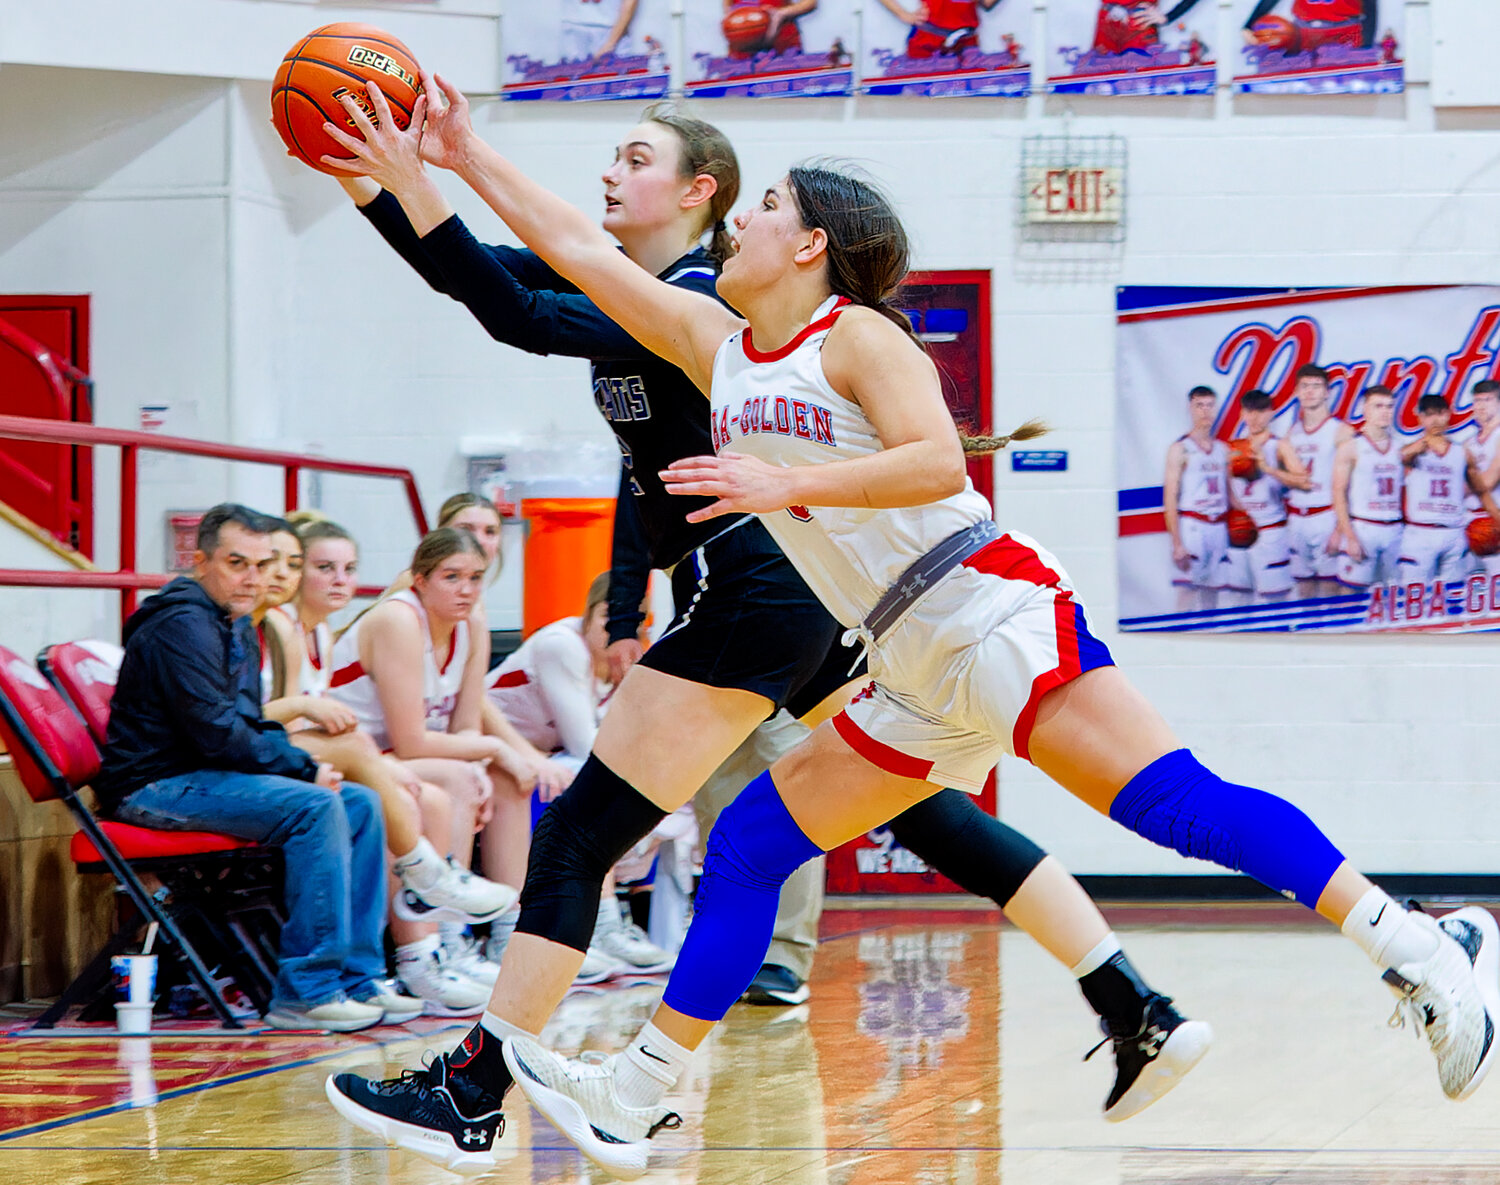 Erin Langston defends for Alba-Golden against Fruitvale Friday. The 86-30 win kept the Lady Panthers unbeaten in district play, coupled with last Tuesday’s 54-20 win over Cumby. The final two games are Friday at North Hopkins and next Tuesday hosting Cooper.